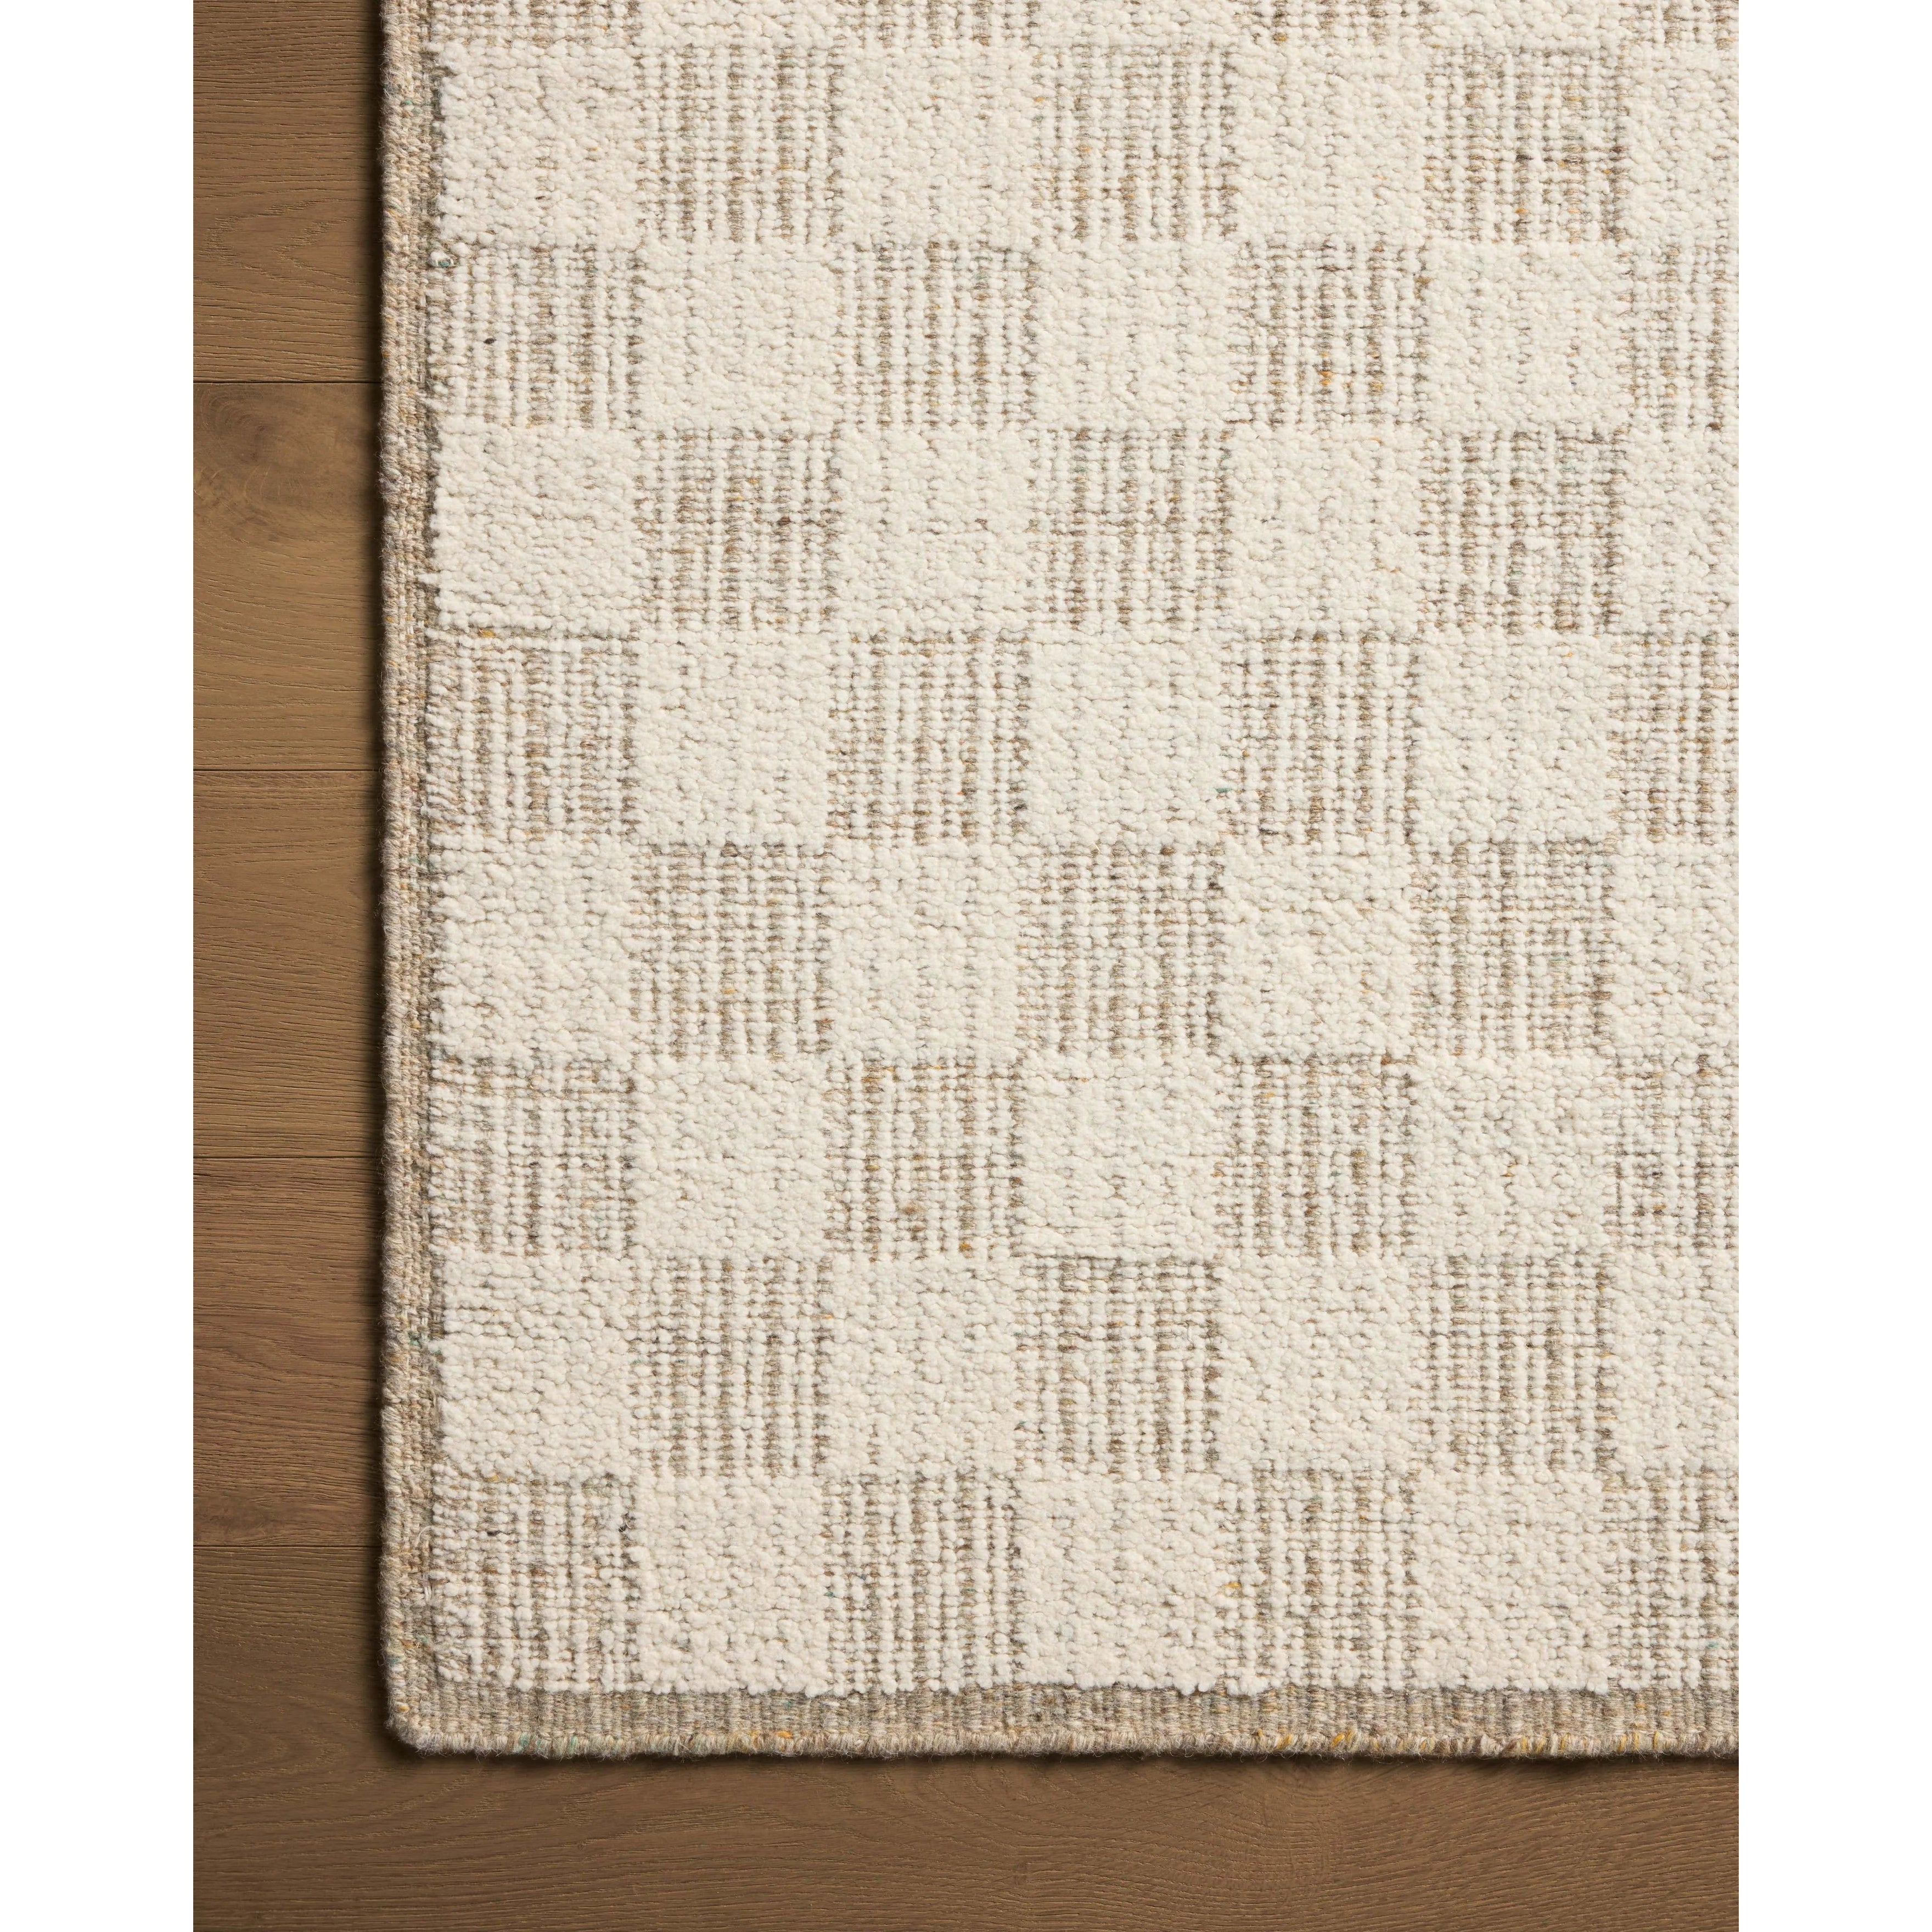 The Knox Ivory / Khaki Rug by Brigette Romanek x Loloi is a handwoven area rug with a contemporary checkerboard pattern and a texture reminiscent of a luxurious knit sweater. Made of a blend of wool and cotton that plays with scale and texture, Knox is imbued with cozy luxury that can anchor any room. Amethyst Home provides interior design, new home construction design consulting, vintage area rugs, and lighting in the Salt Lake City metro area.